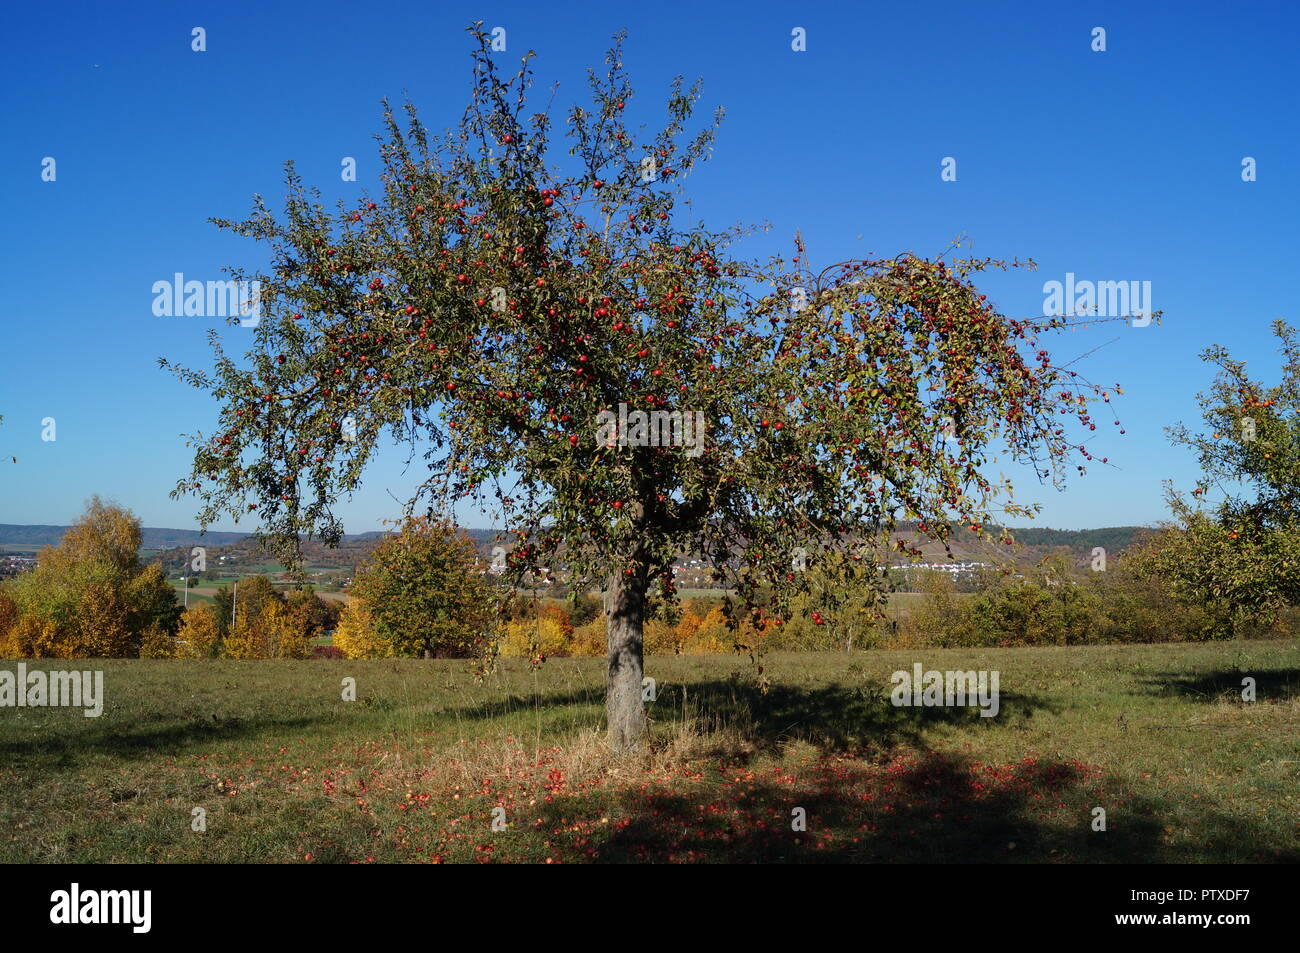 Old apple tree and fallen apples Stock Photo